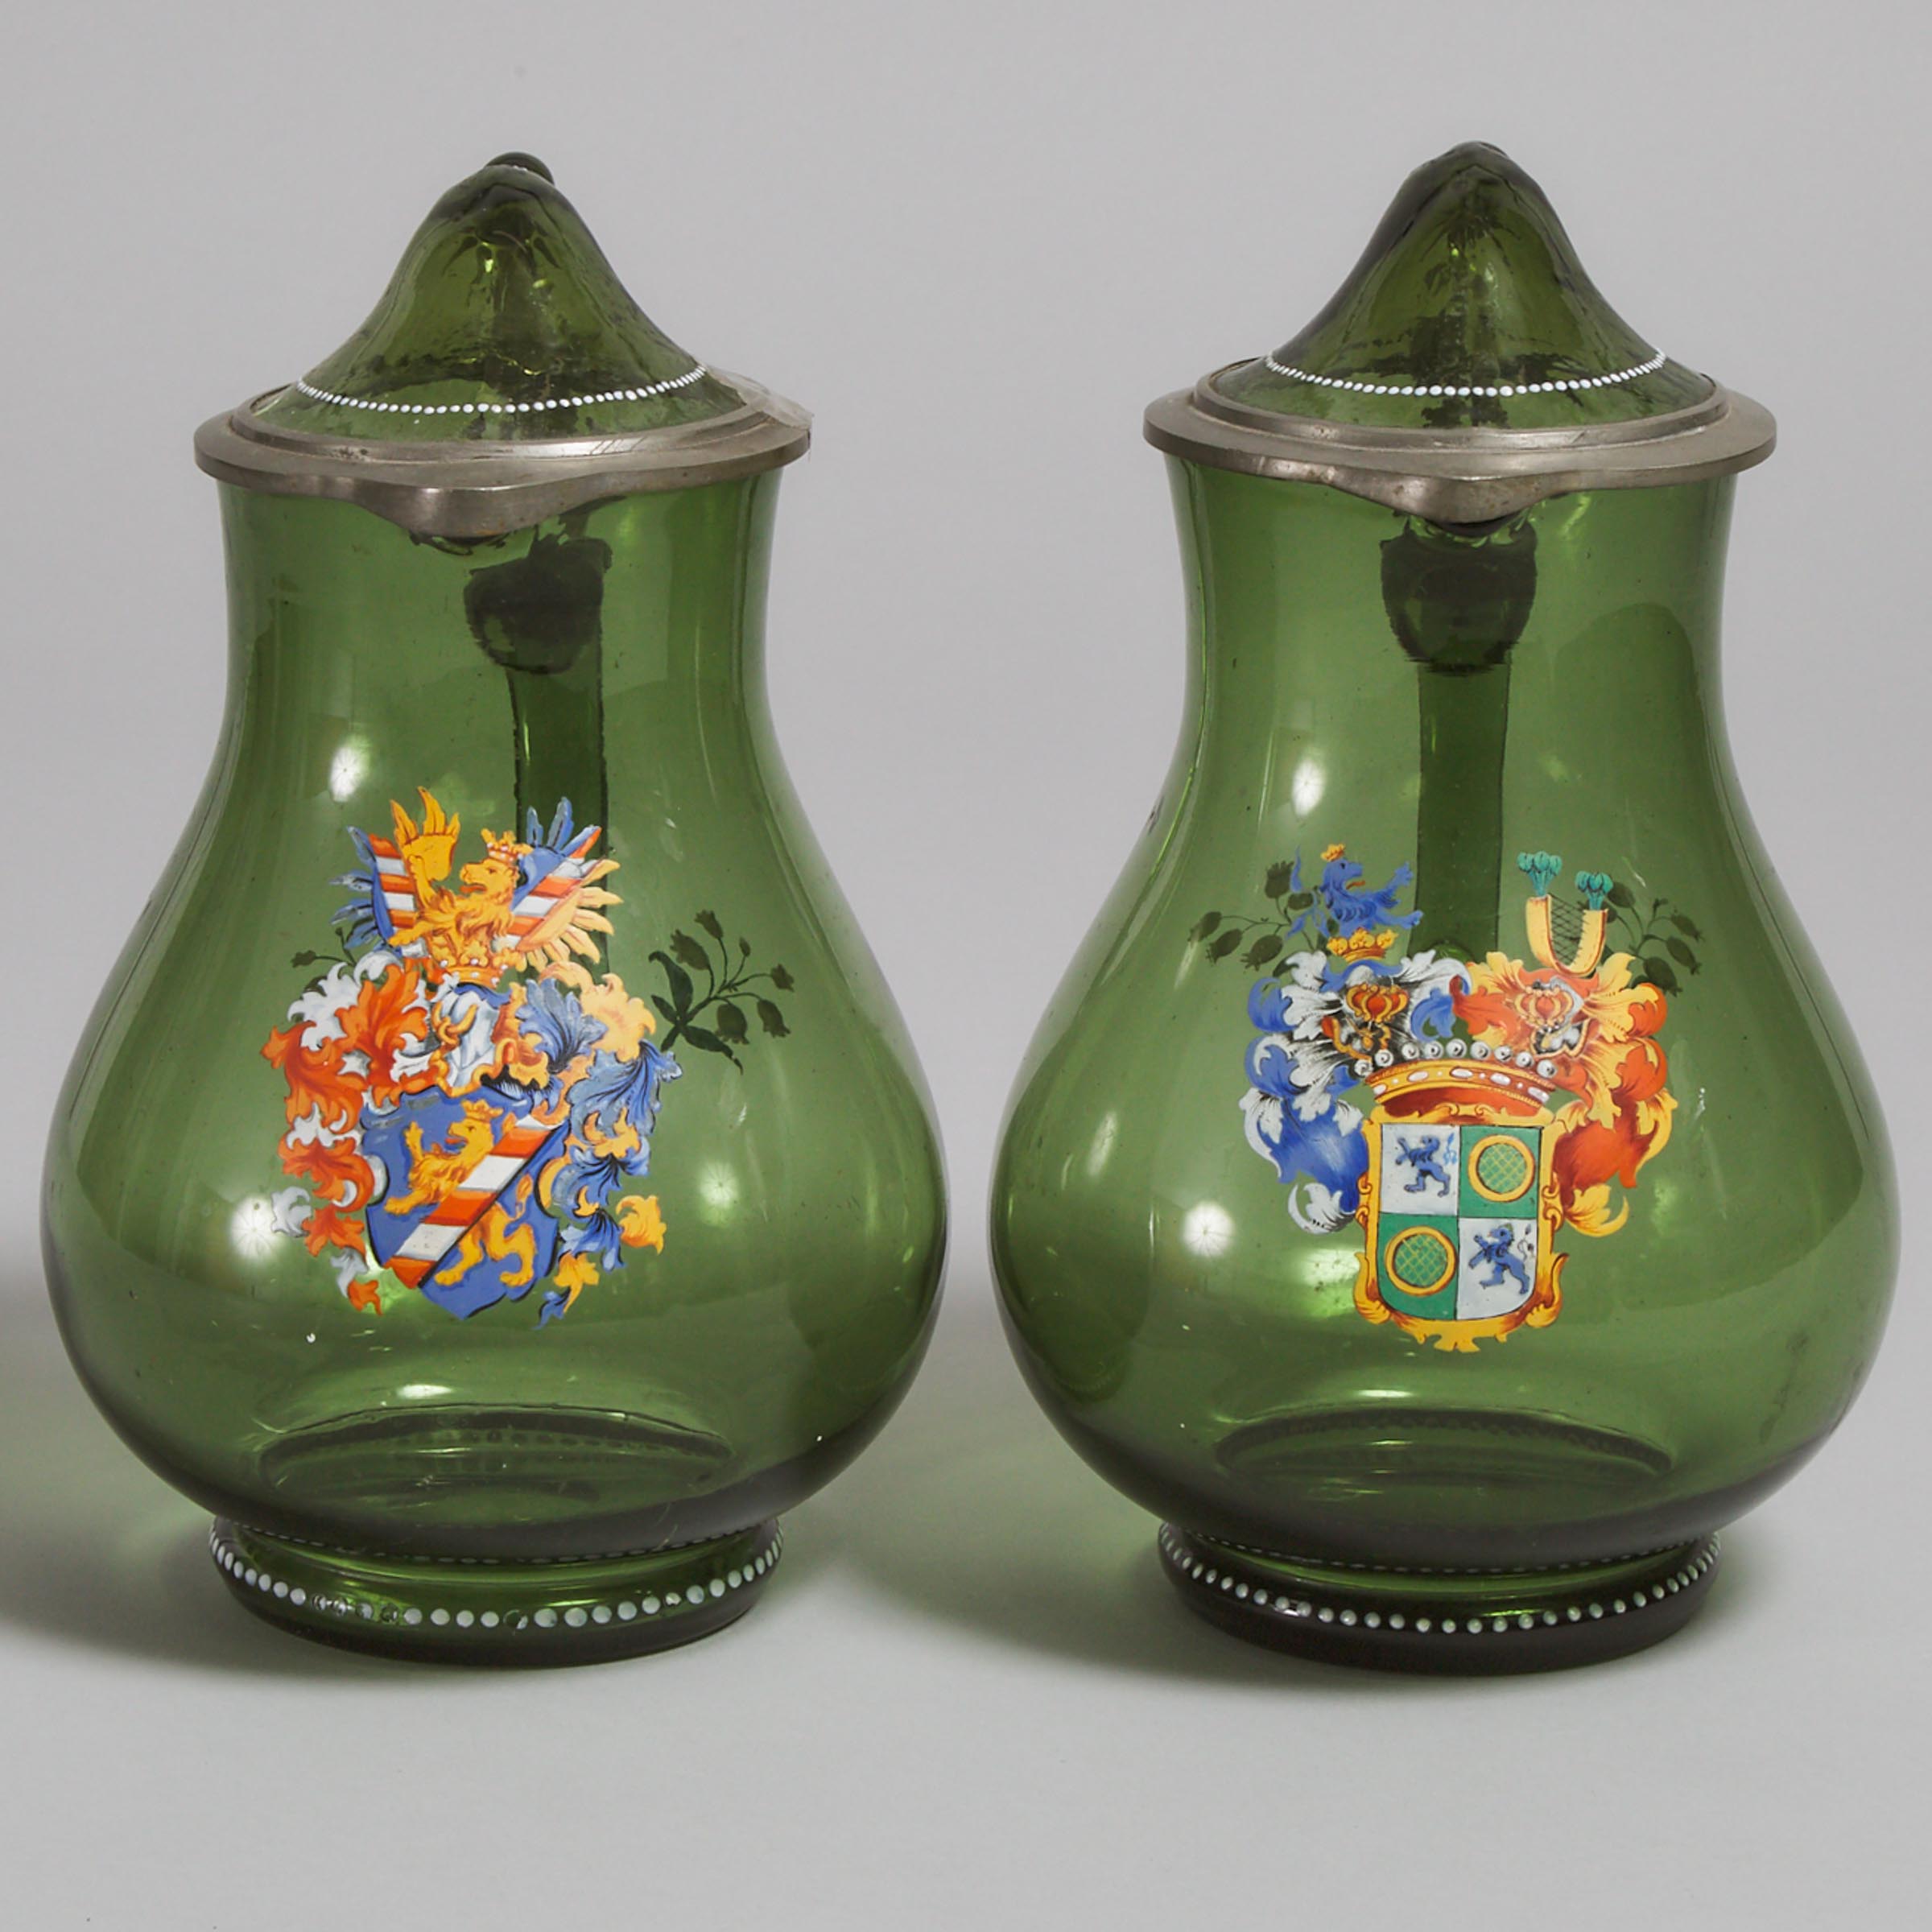 Pair of German Pewter Mounted Armorial Enameled Green Glass Covered Jugs, late 19th century